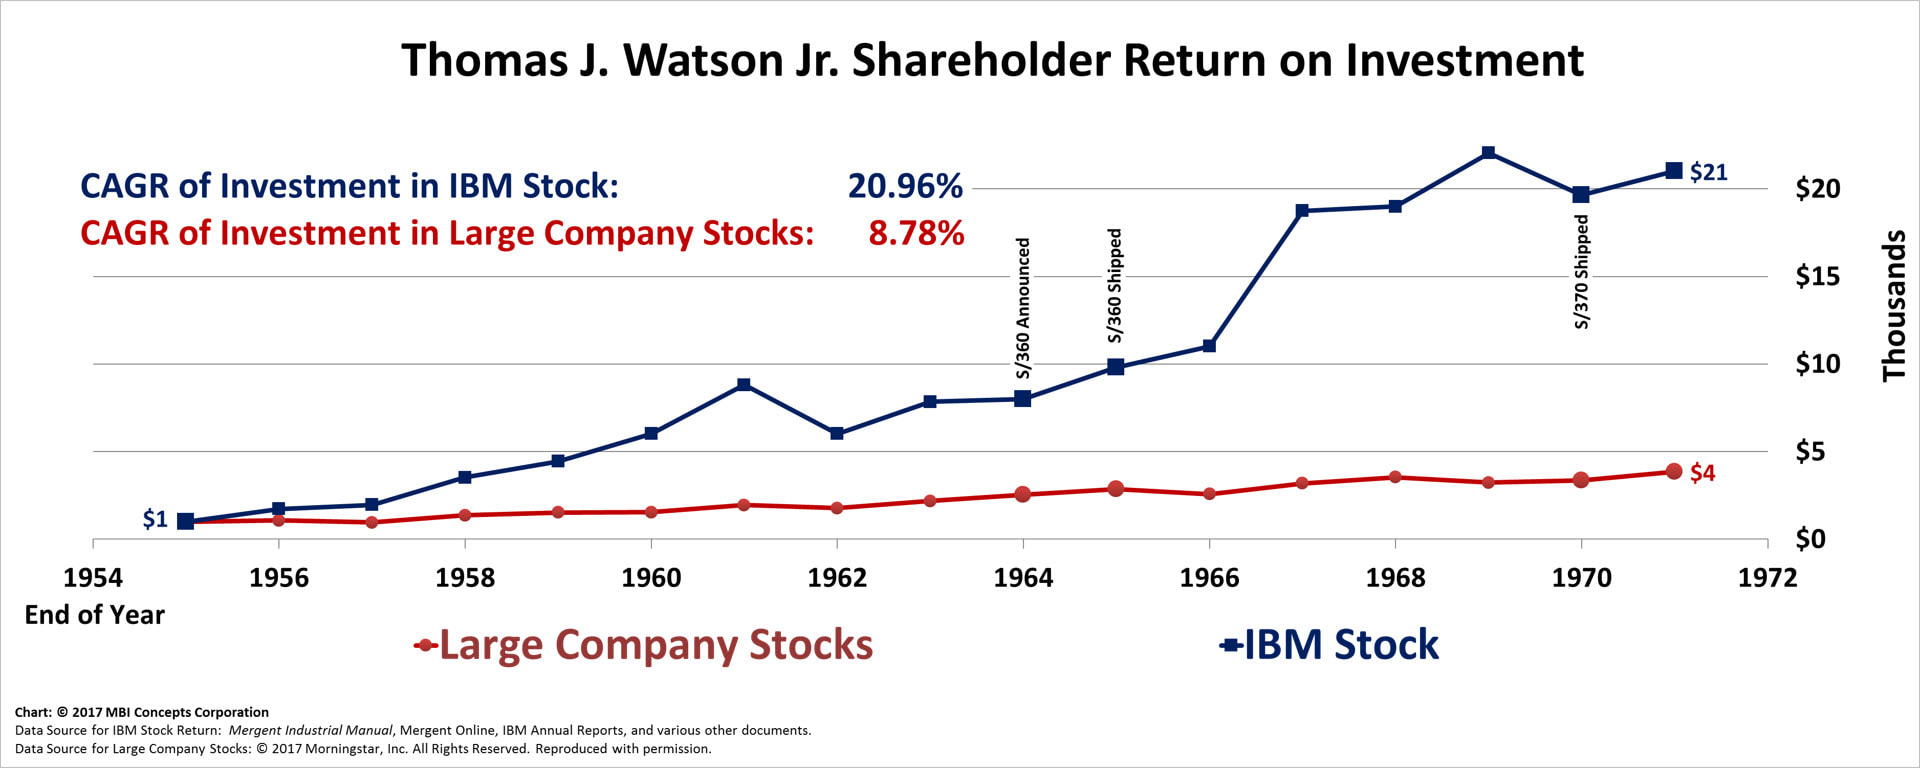 A color line graph showing IBM Stock Total Return on Investment for Thomas J. Watson Jr. from 1955 to 1972 compared with a large company stock index.